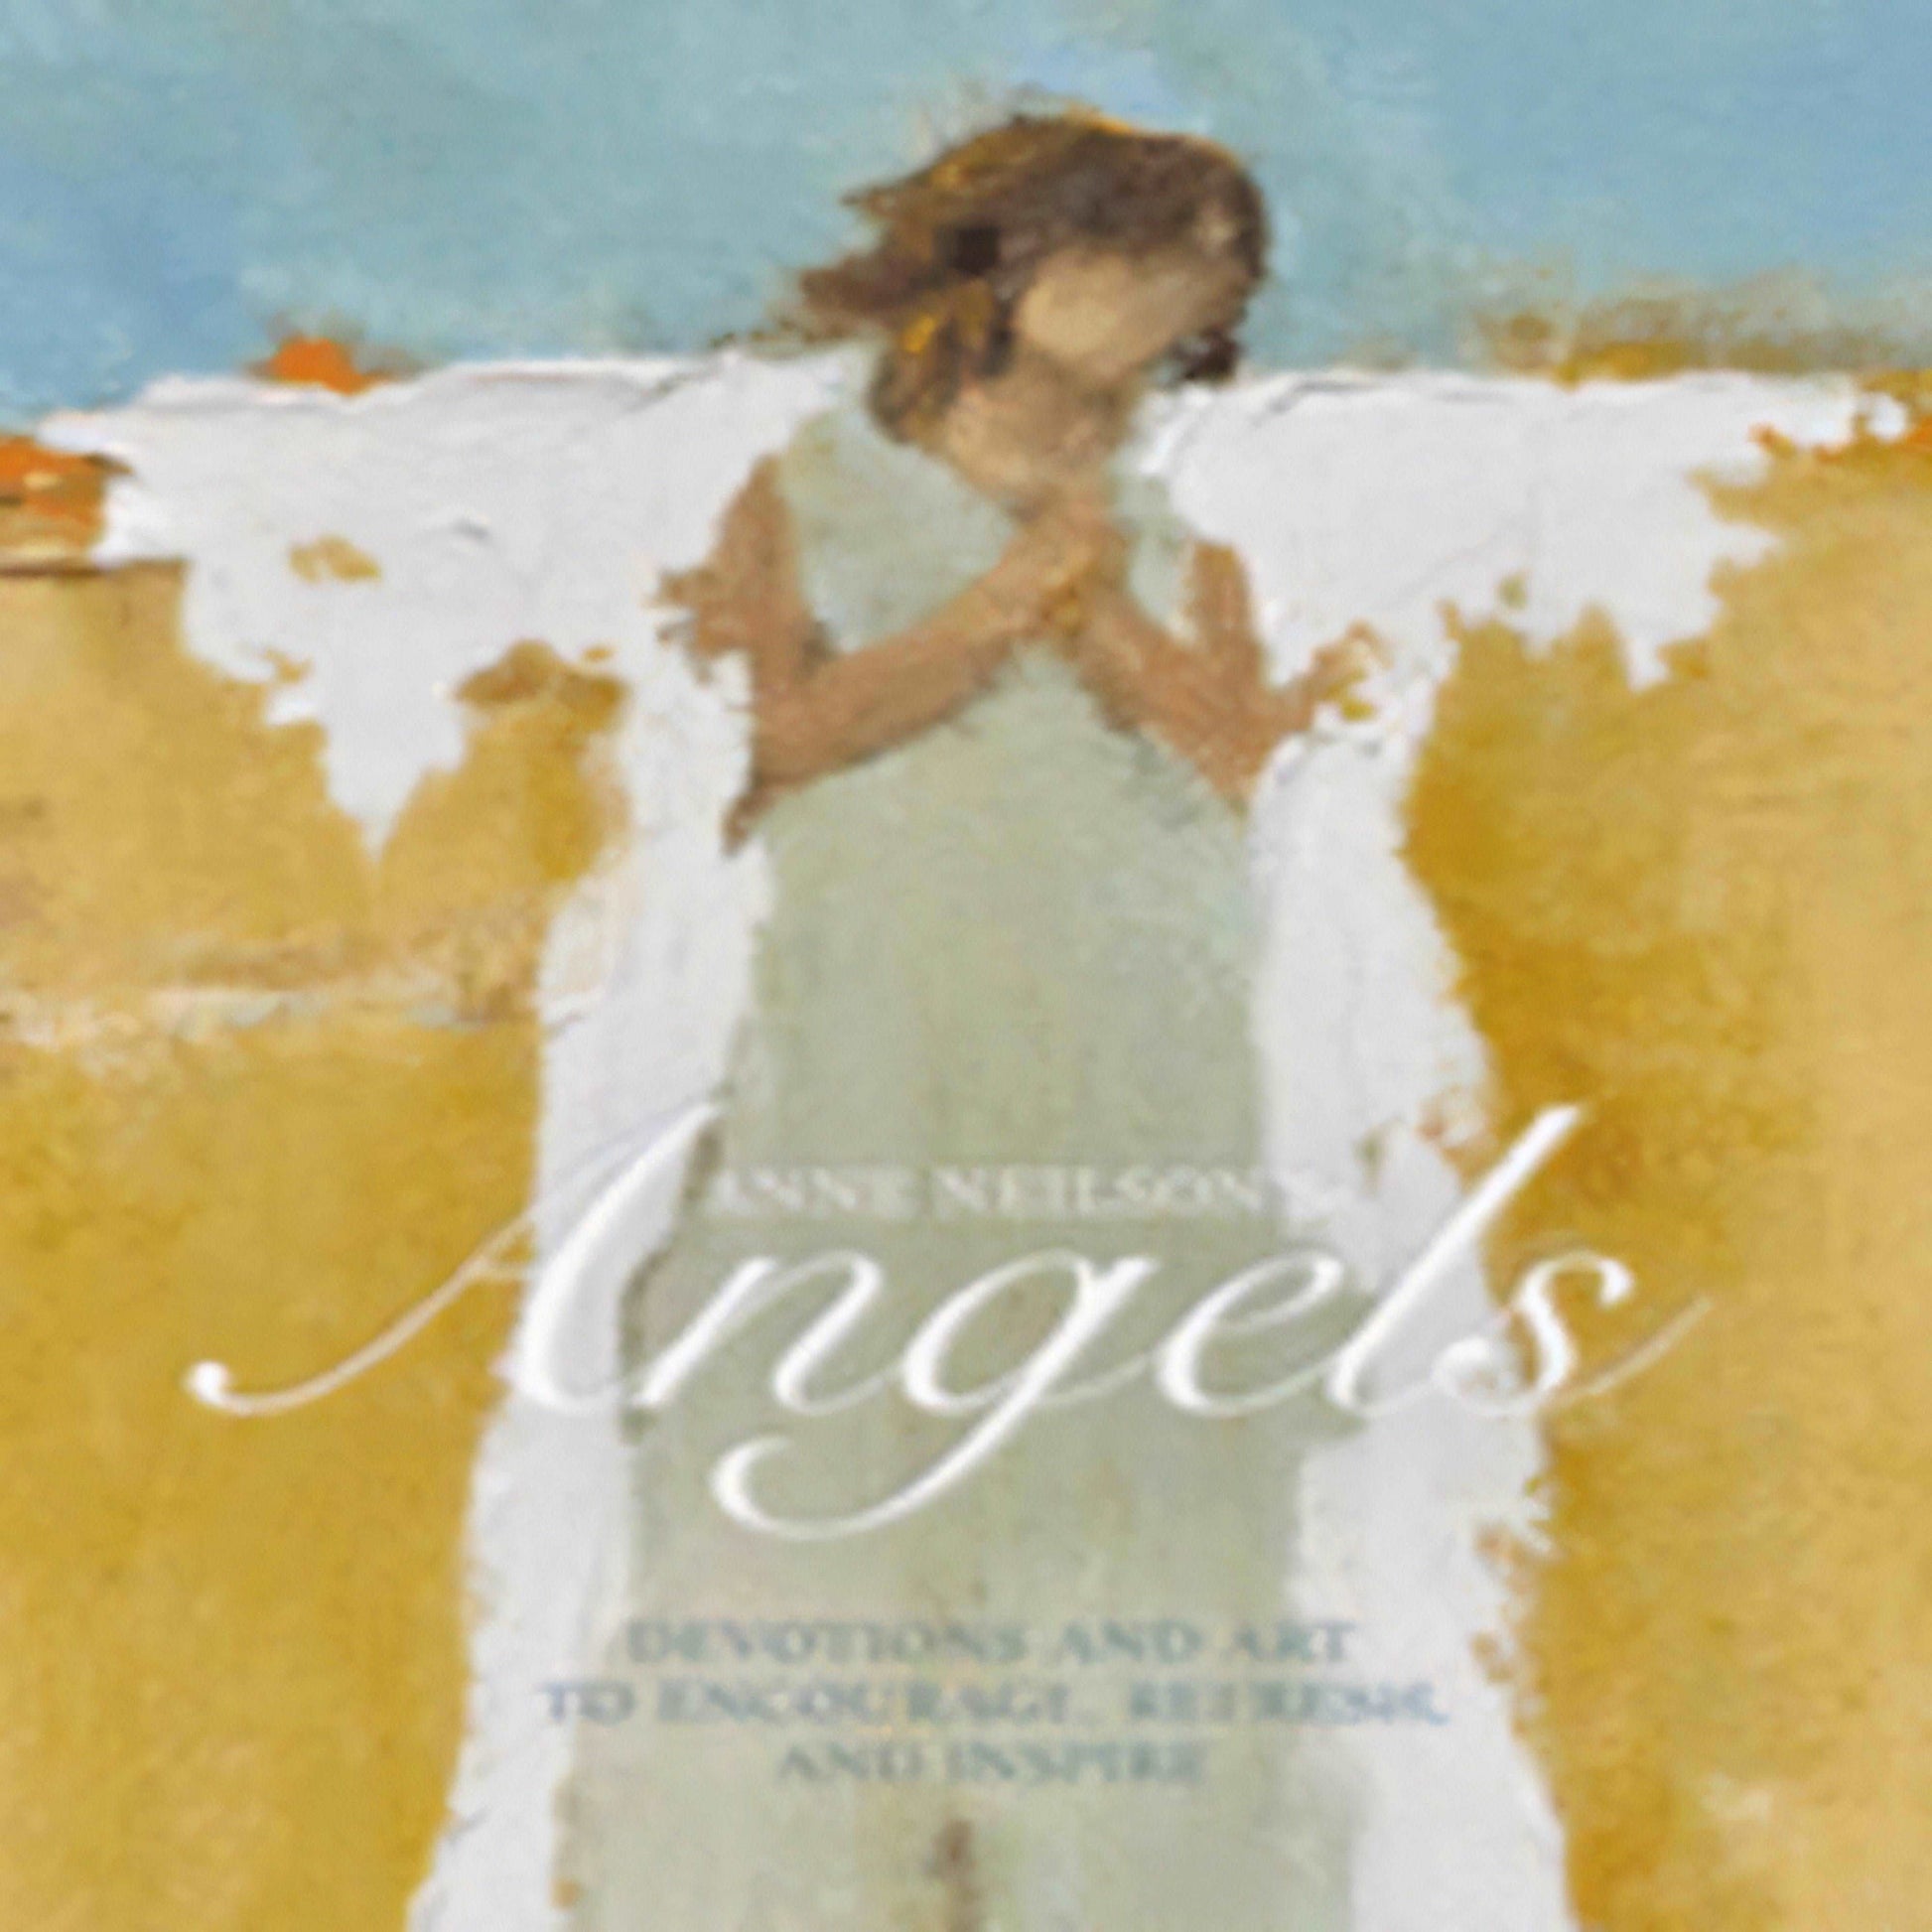 Anne Neilson's Angels: Devotions and Art to Encourage, Refresh, and Inspire248-031723-1400220408DPGBOOKSTORE.COM. Today's Bestsellers.